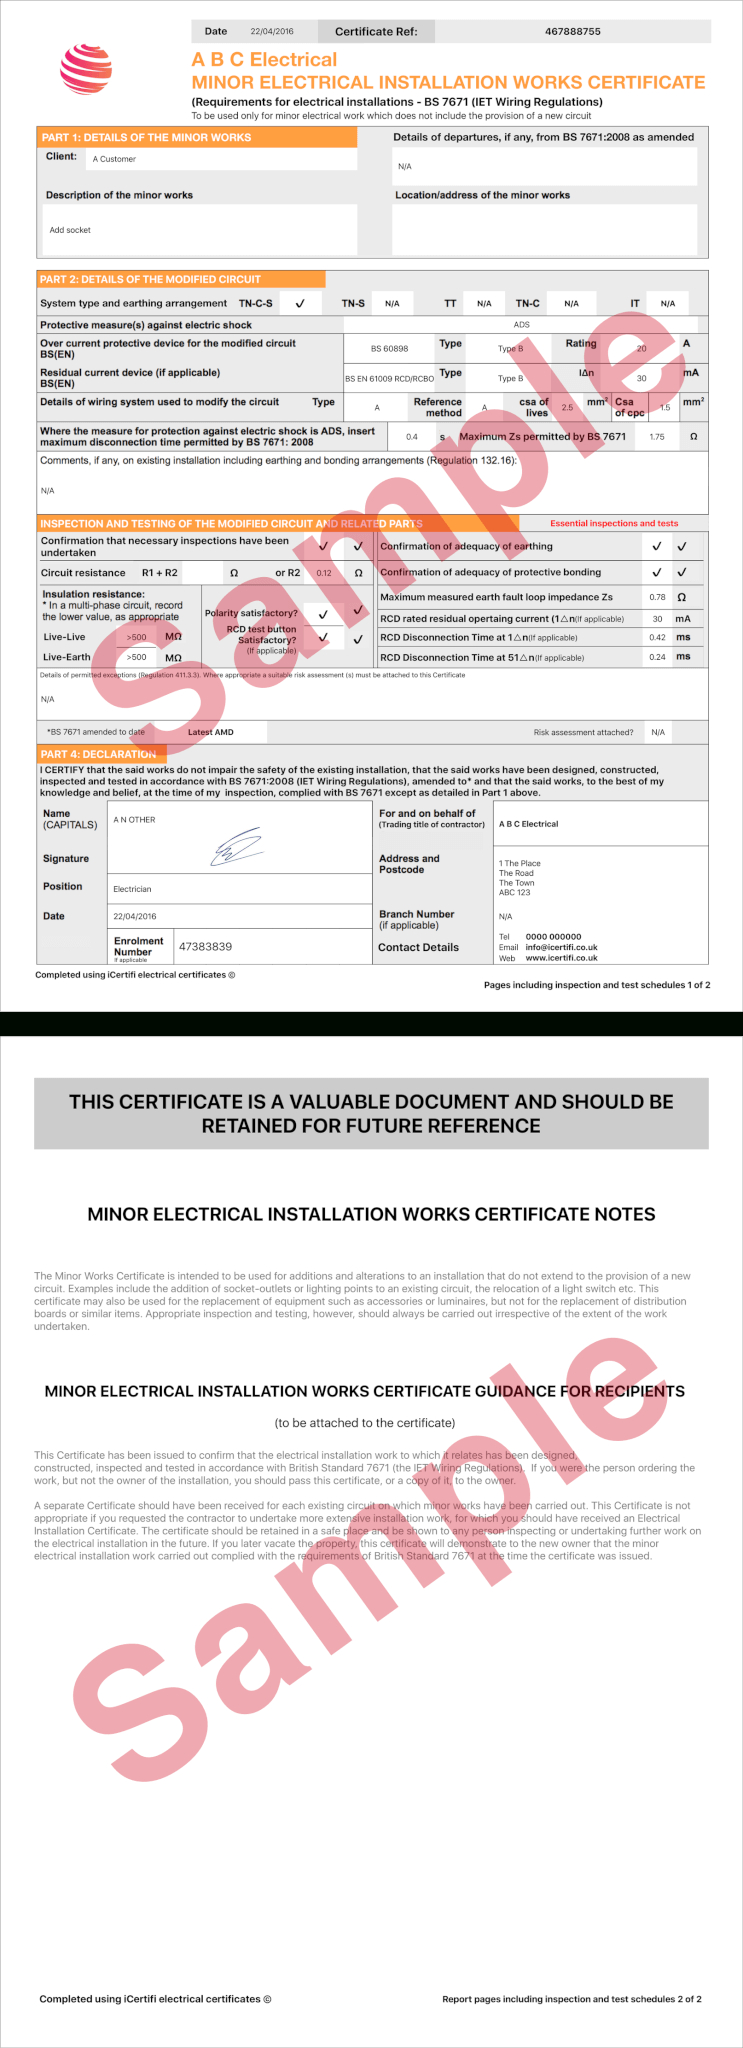 Electrical Certificate – Example Minor Works Certificate Regarding Electrical Minor Works Certificate Template